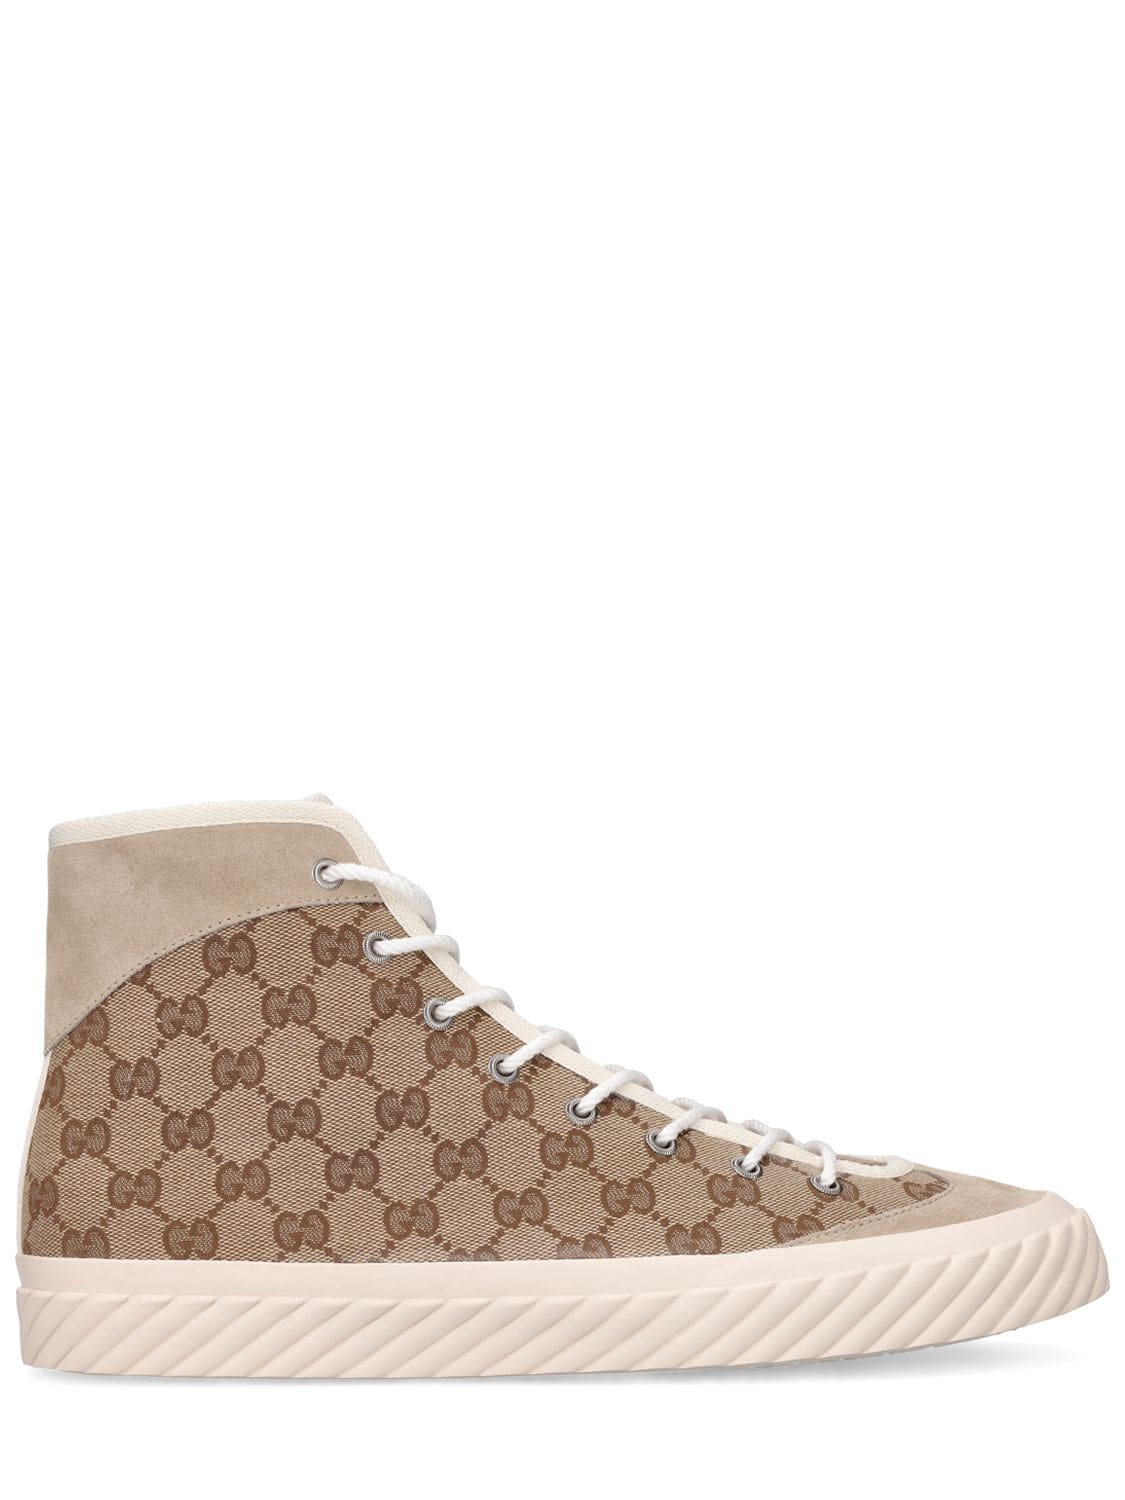 Tortuga Gg Canvas Sneakers – MEN > SHOES > SNEAKERS